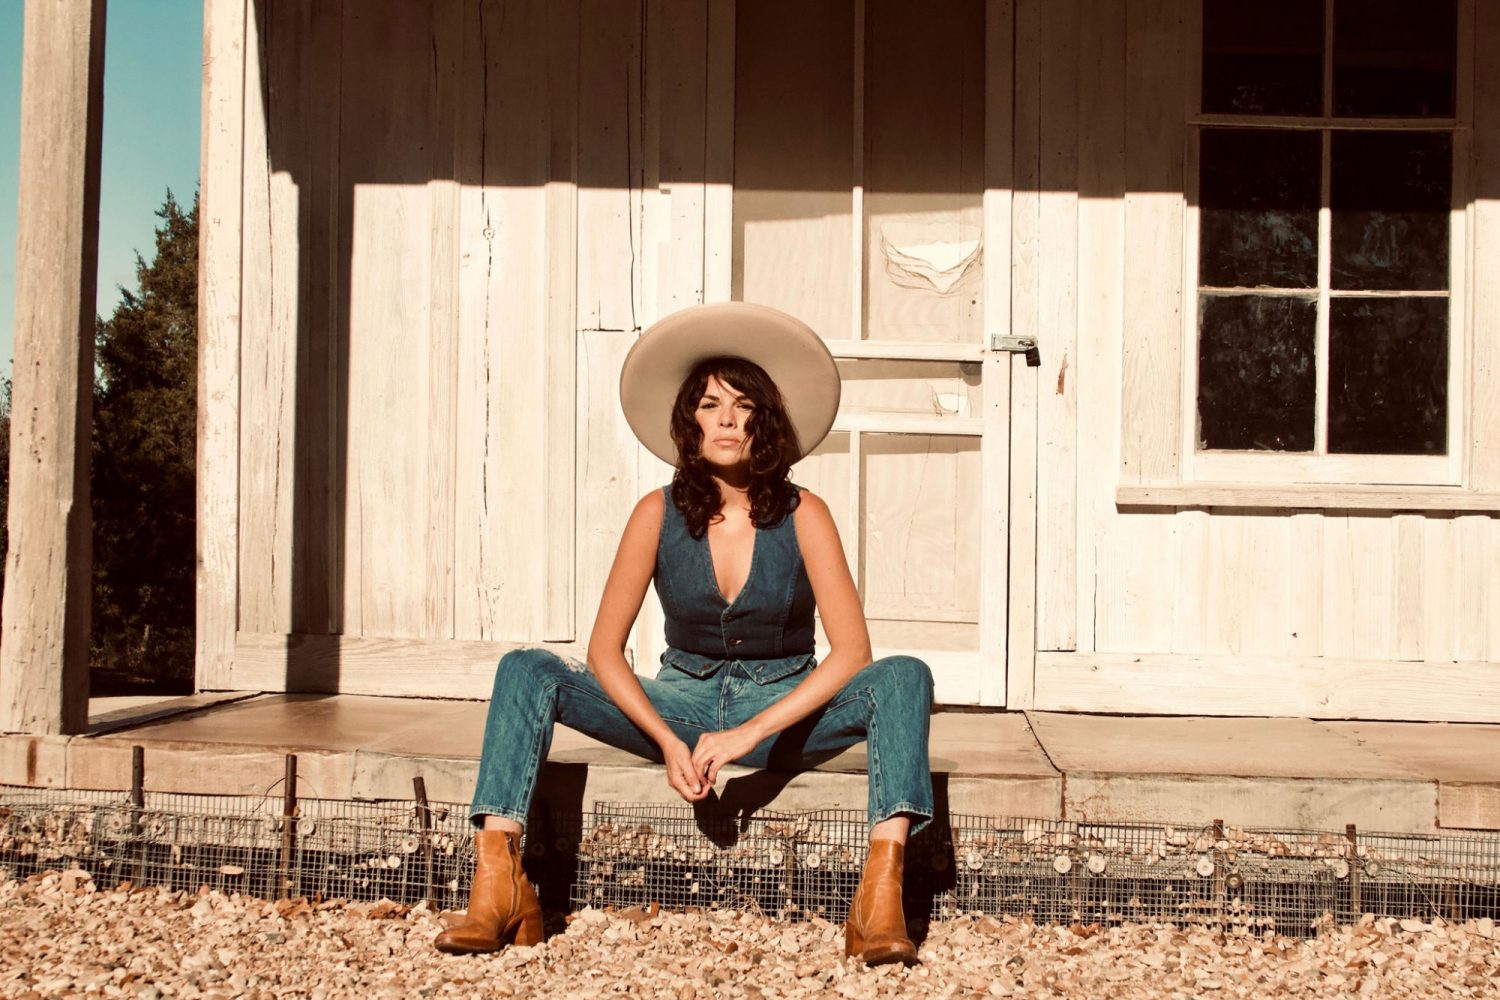 Interview with Whitney Rose on the release of her new album, We Still